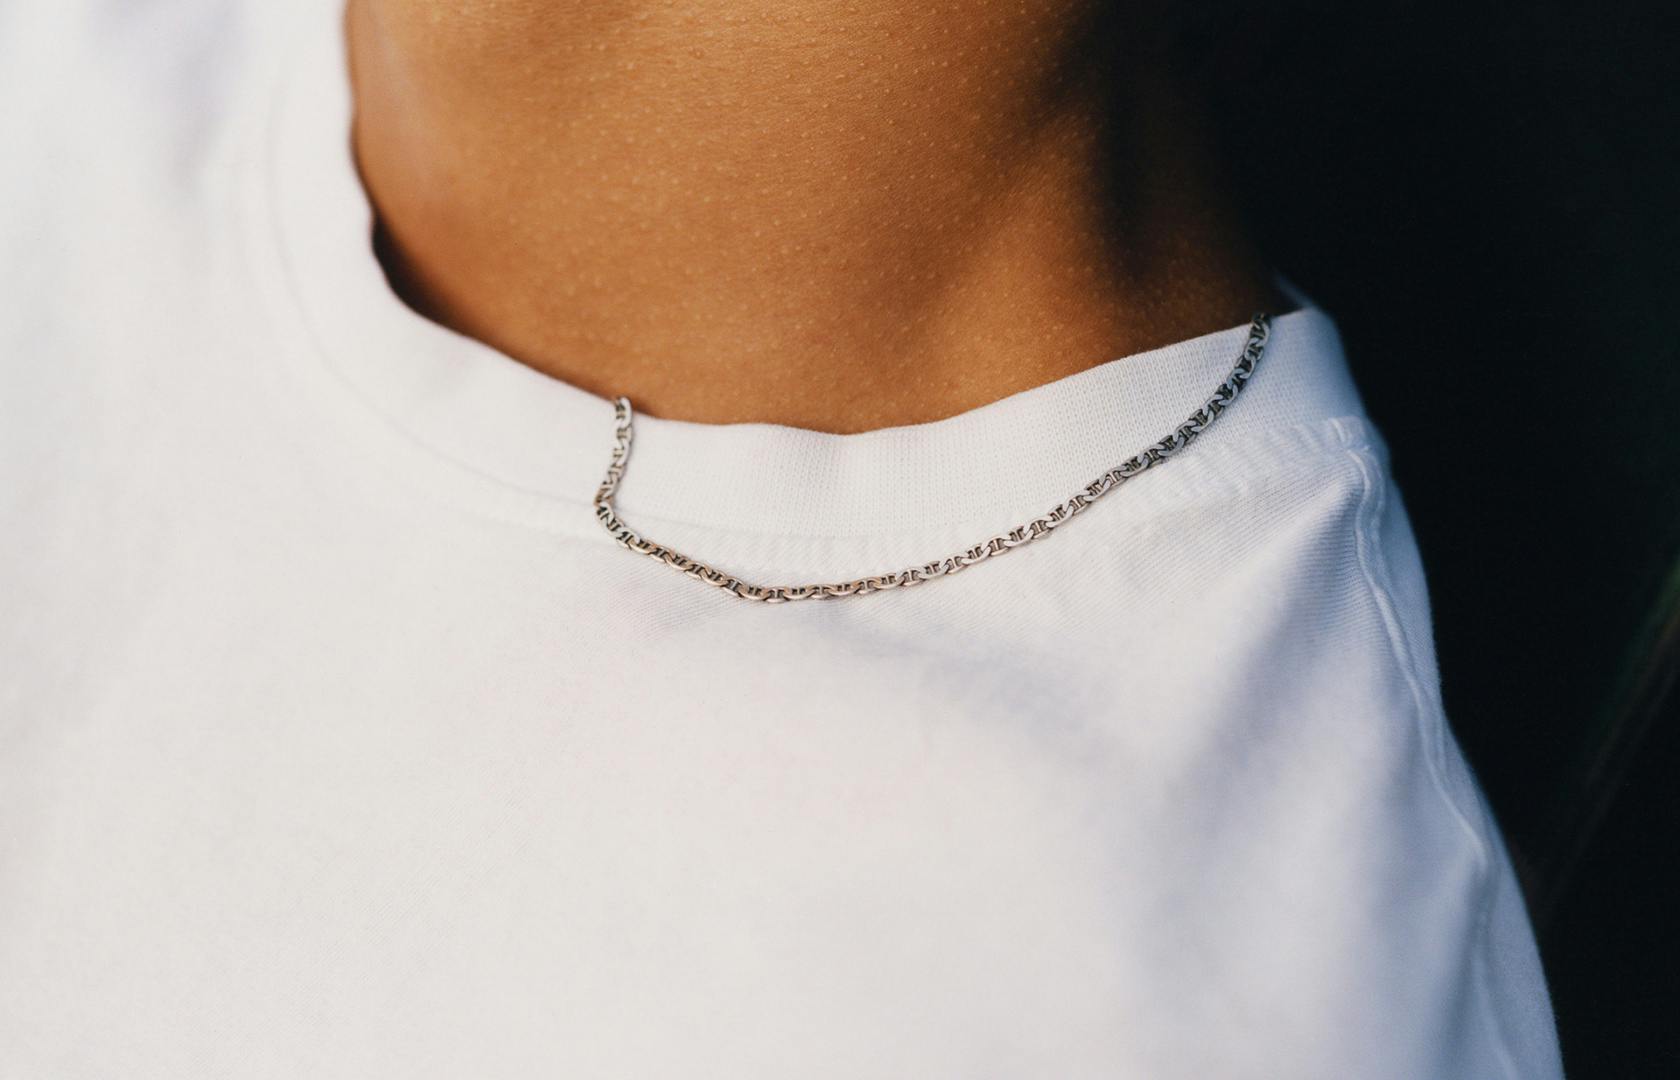 Close-up of a person wearing a thin chain necklace draped over a white t-shirt